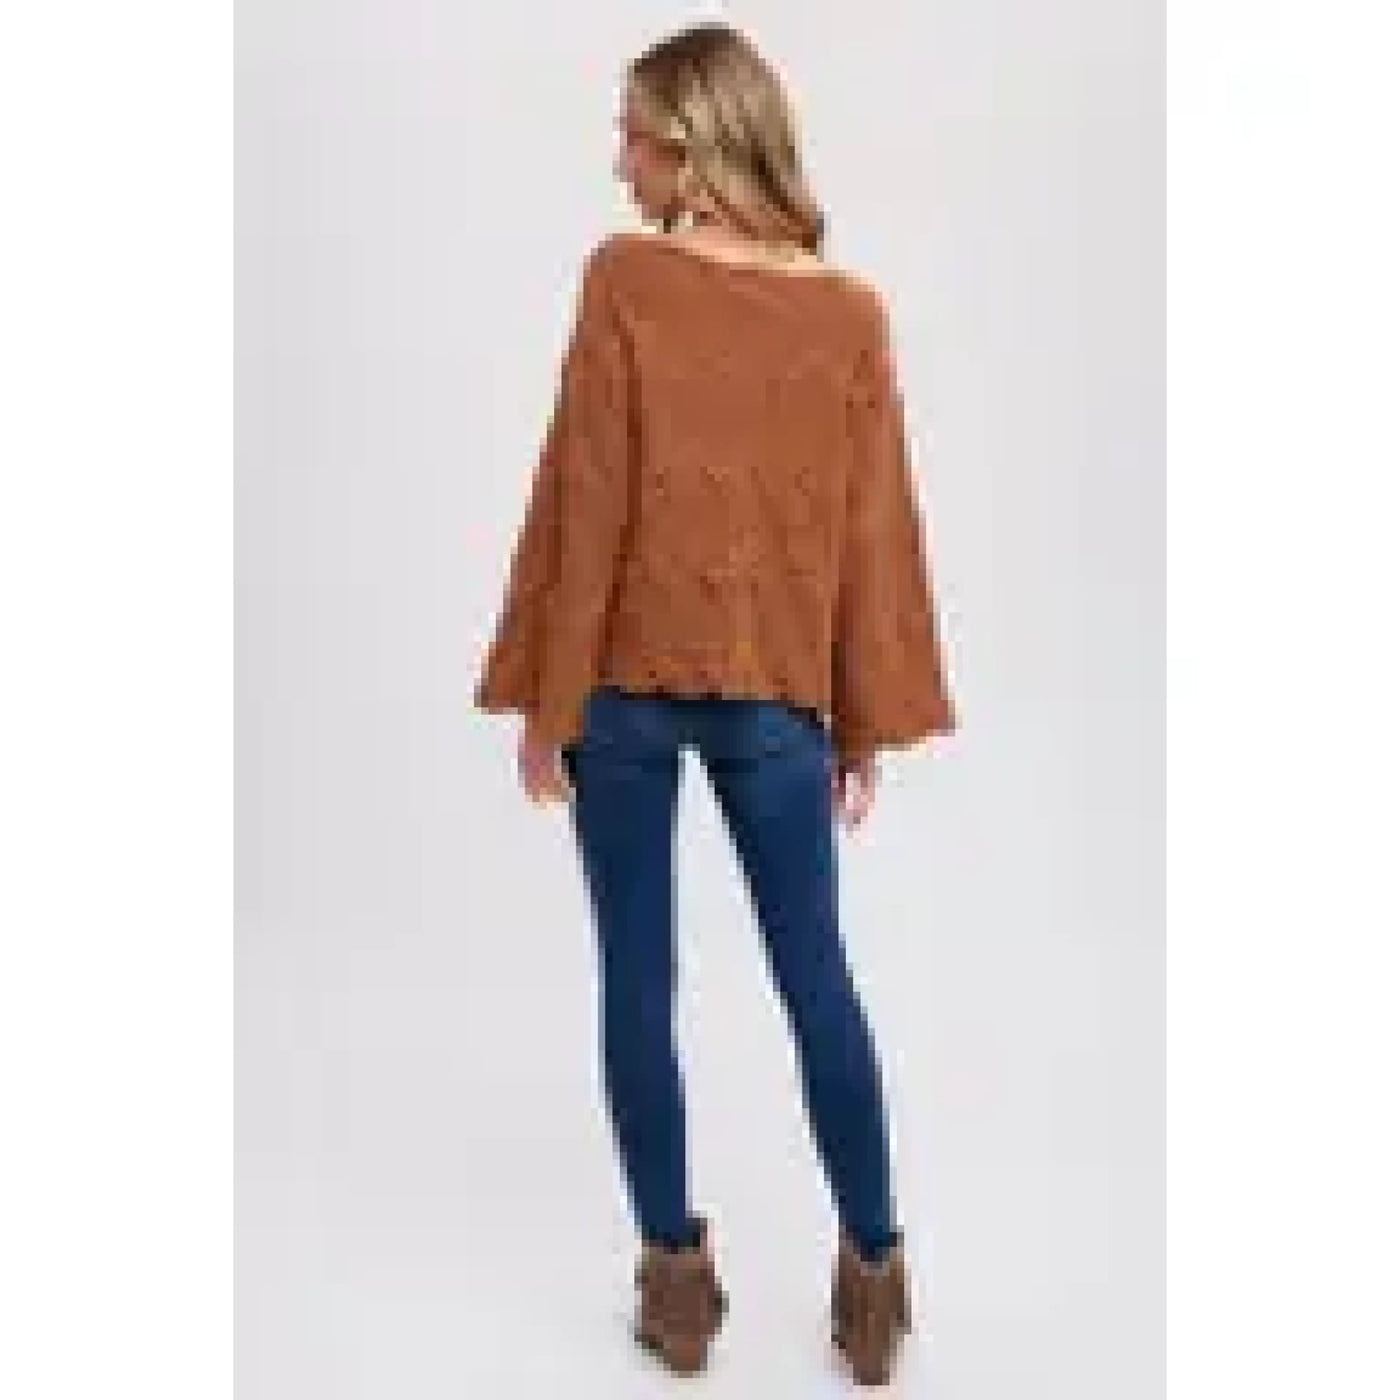 Doing Just Fine Sweater - 130 Sweaters/Cardigans